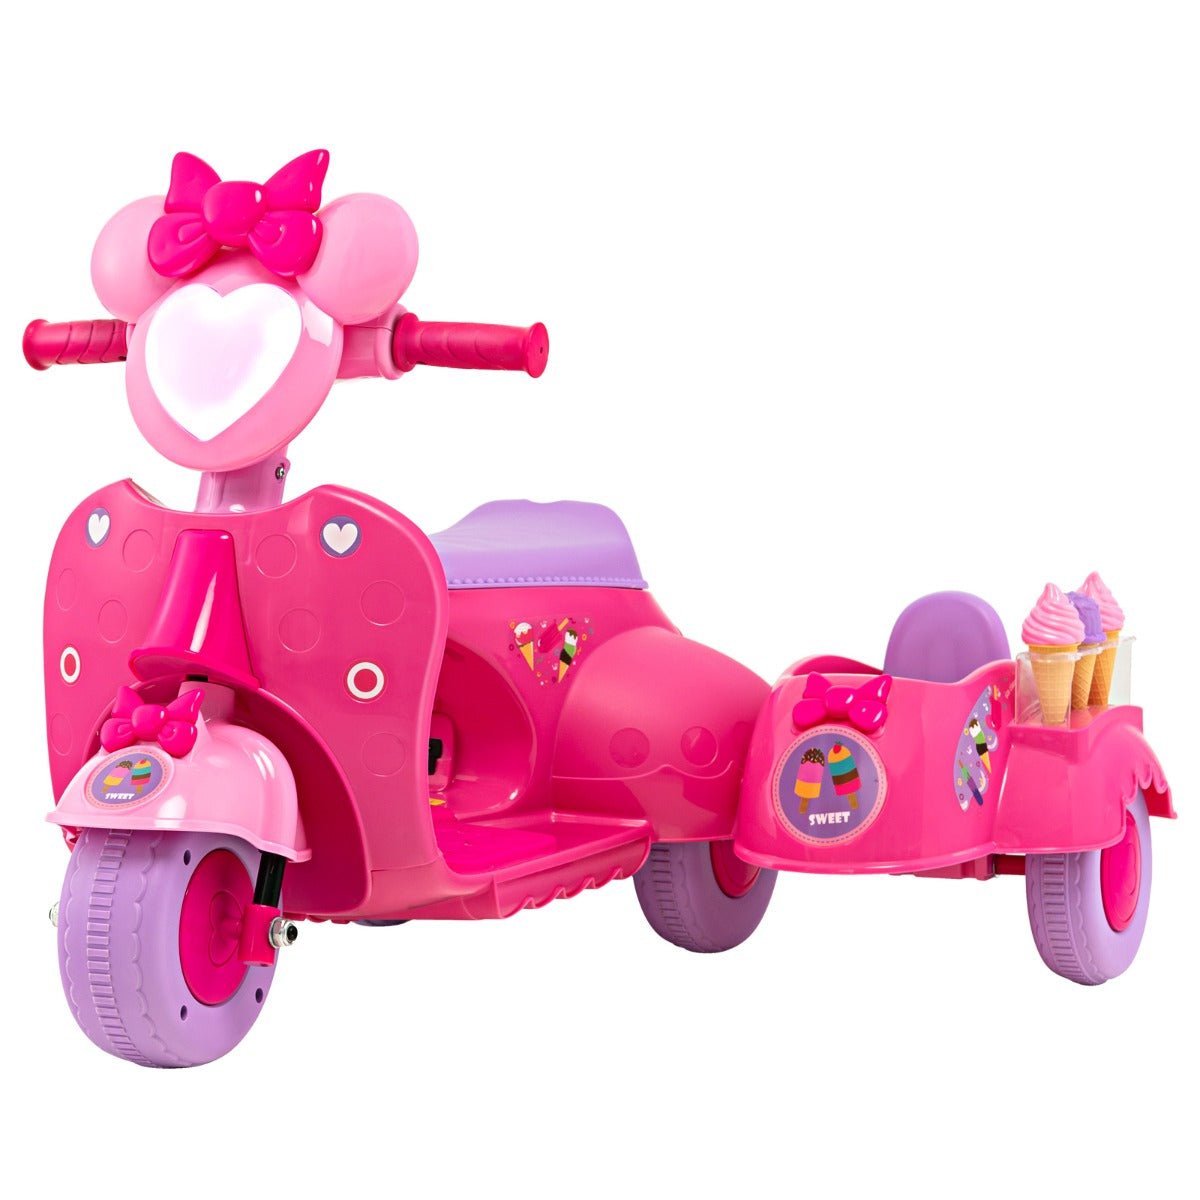 Detachable Sidecar Kids Motorbike: Pink Ride-On for Little Explorers